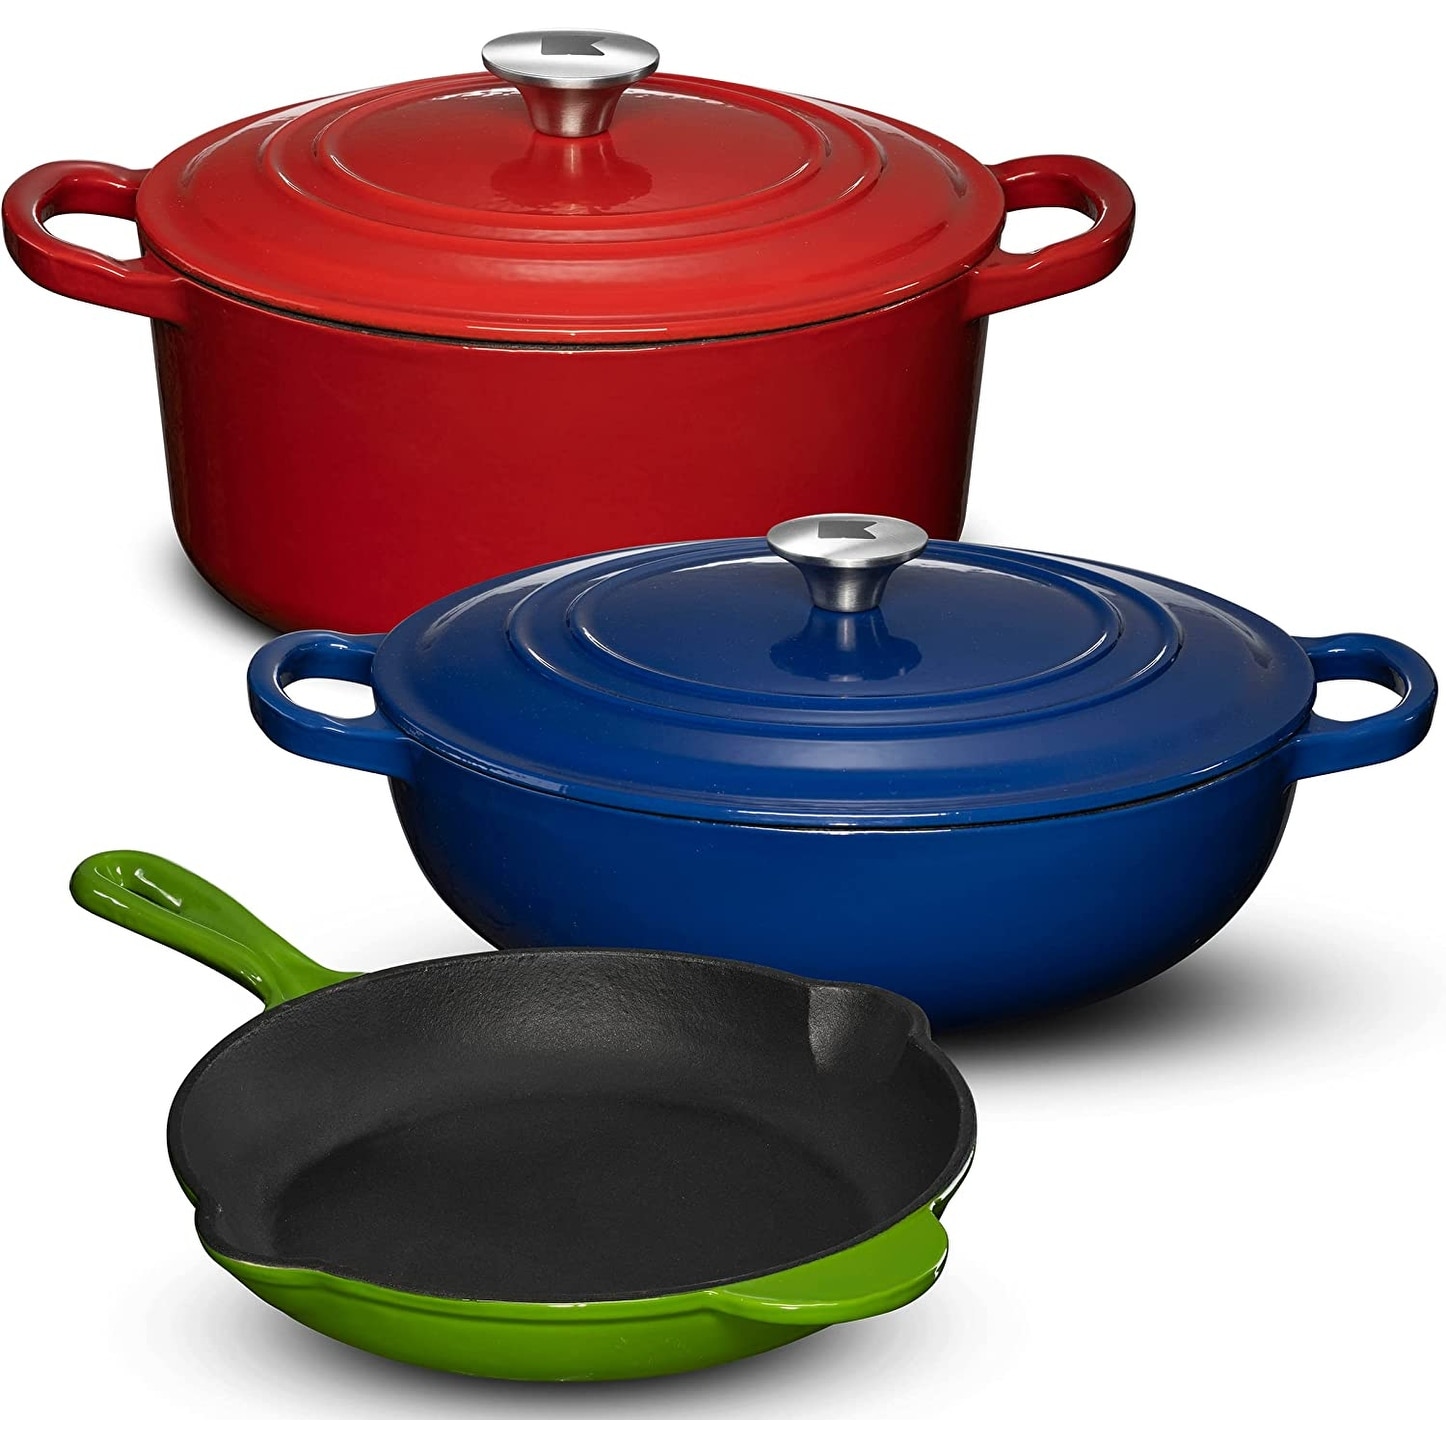 https://ak1.ostkcdn.com/images/products/is/images/direct/b9f174b3f8f4cf5dff7f2d2be63609fa8426dcfa/Enameled-Cast-Iron-Cookware-Set---5-Pieces-Solid-Colored-Braiser-Dish%2C-Fry-Pan%3B-Dutch-Oven-Pot-with-Lids.jpg